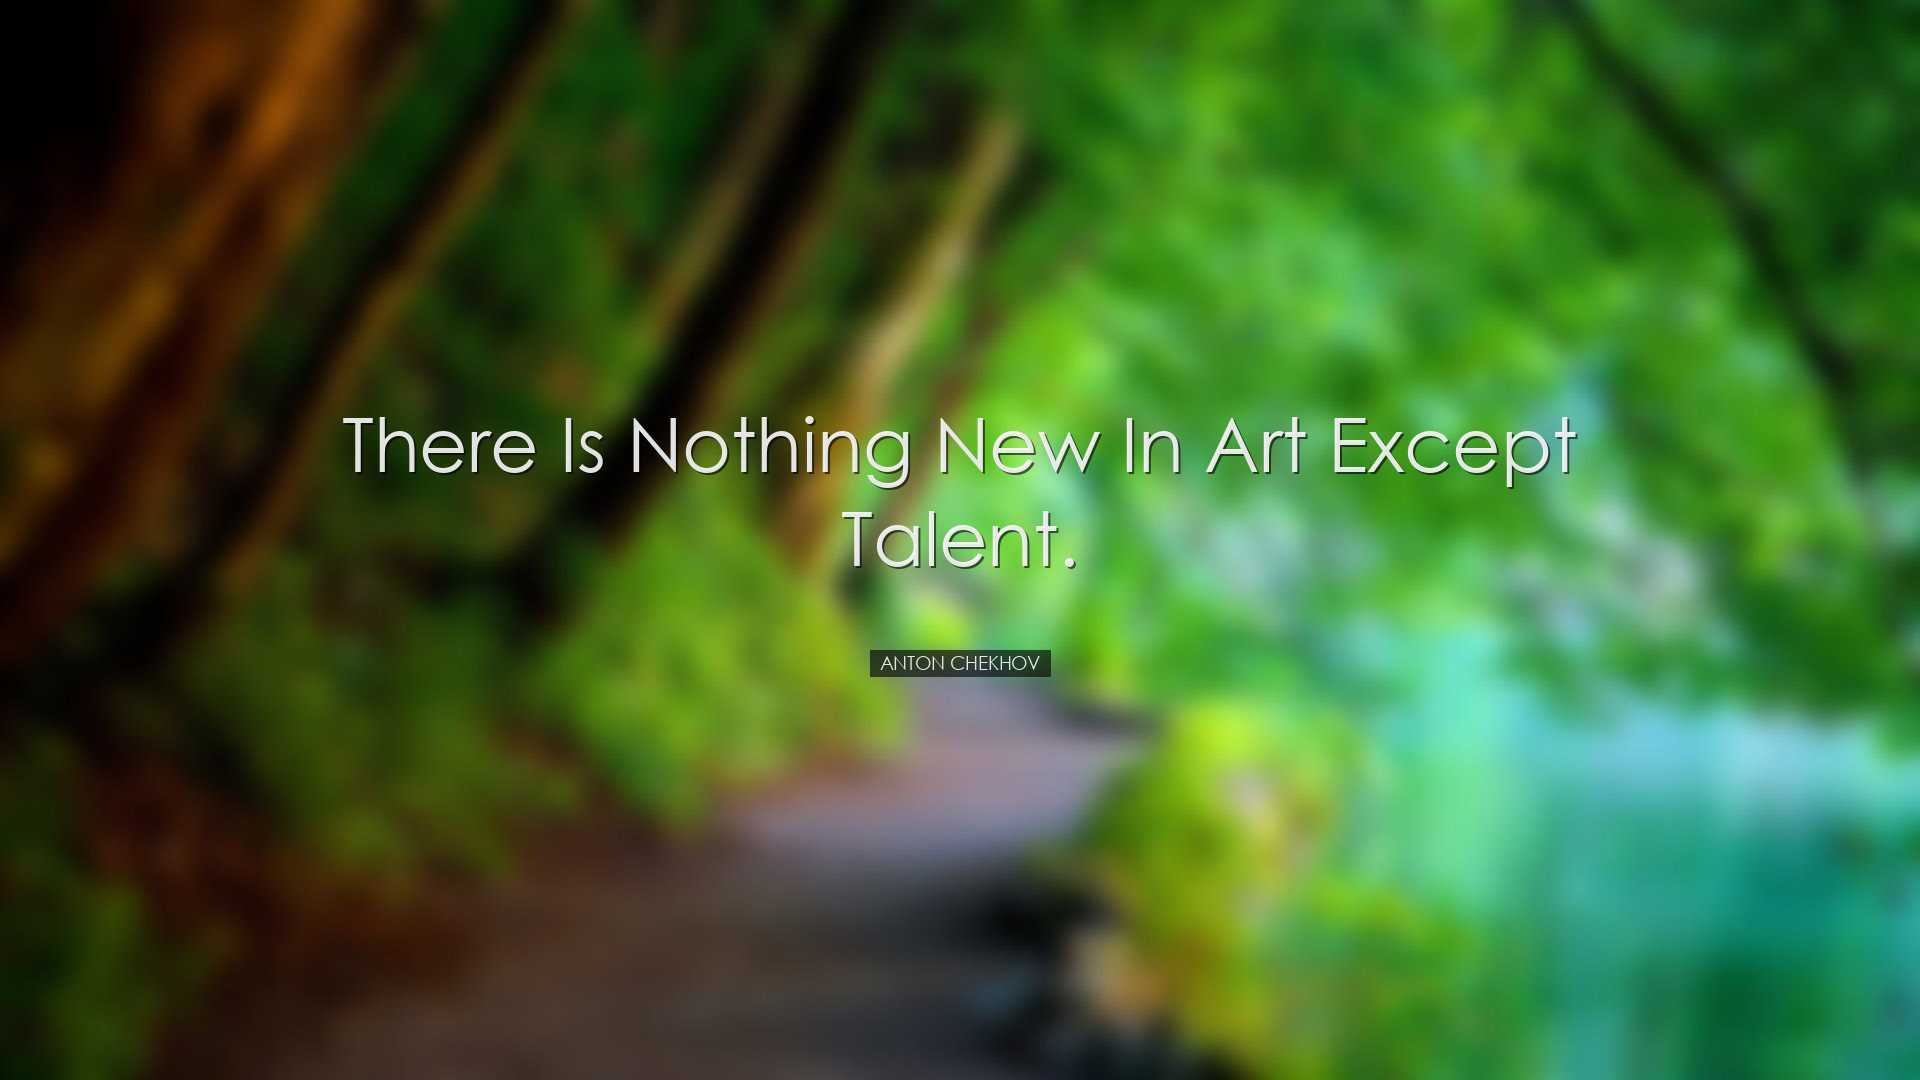 There is nothing new in art except talent. - Anton Chekhov